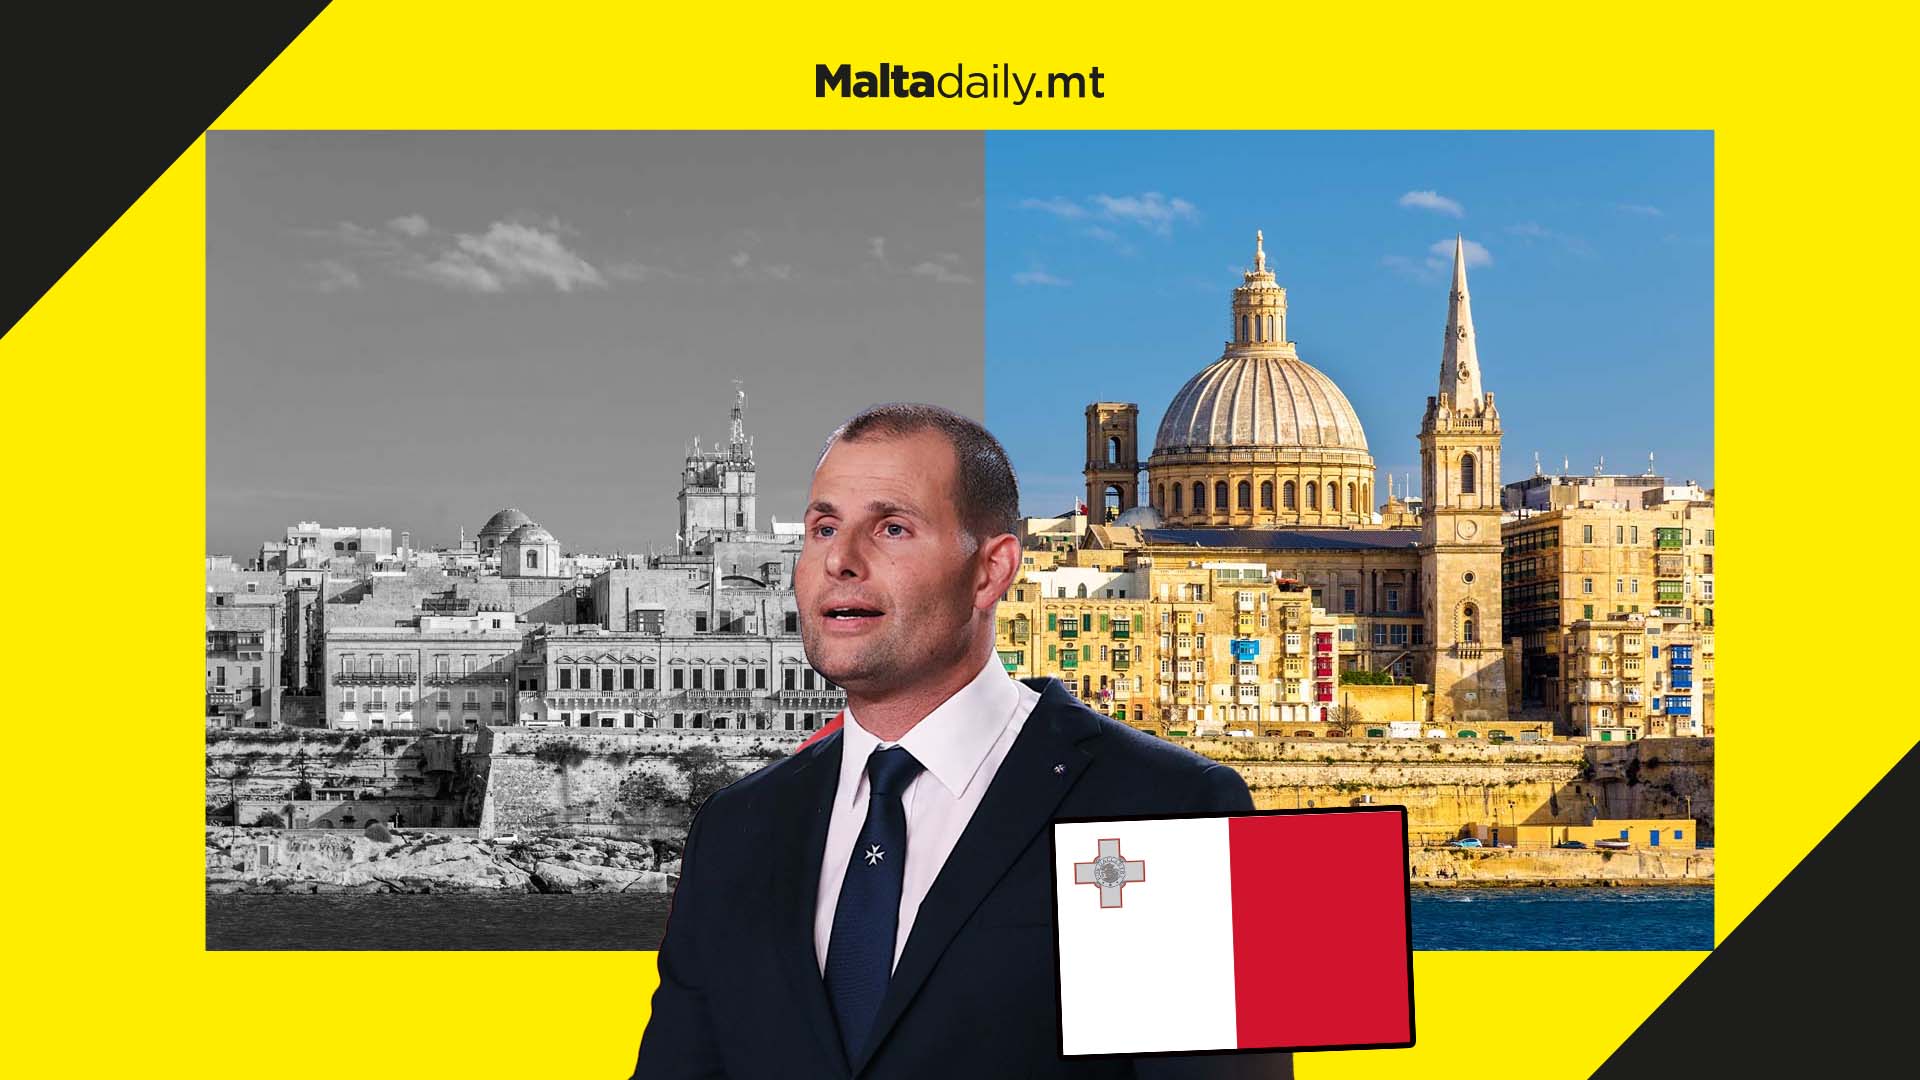 Malta’s grey ‘delisting’ shows reforms worked says Prime Minister